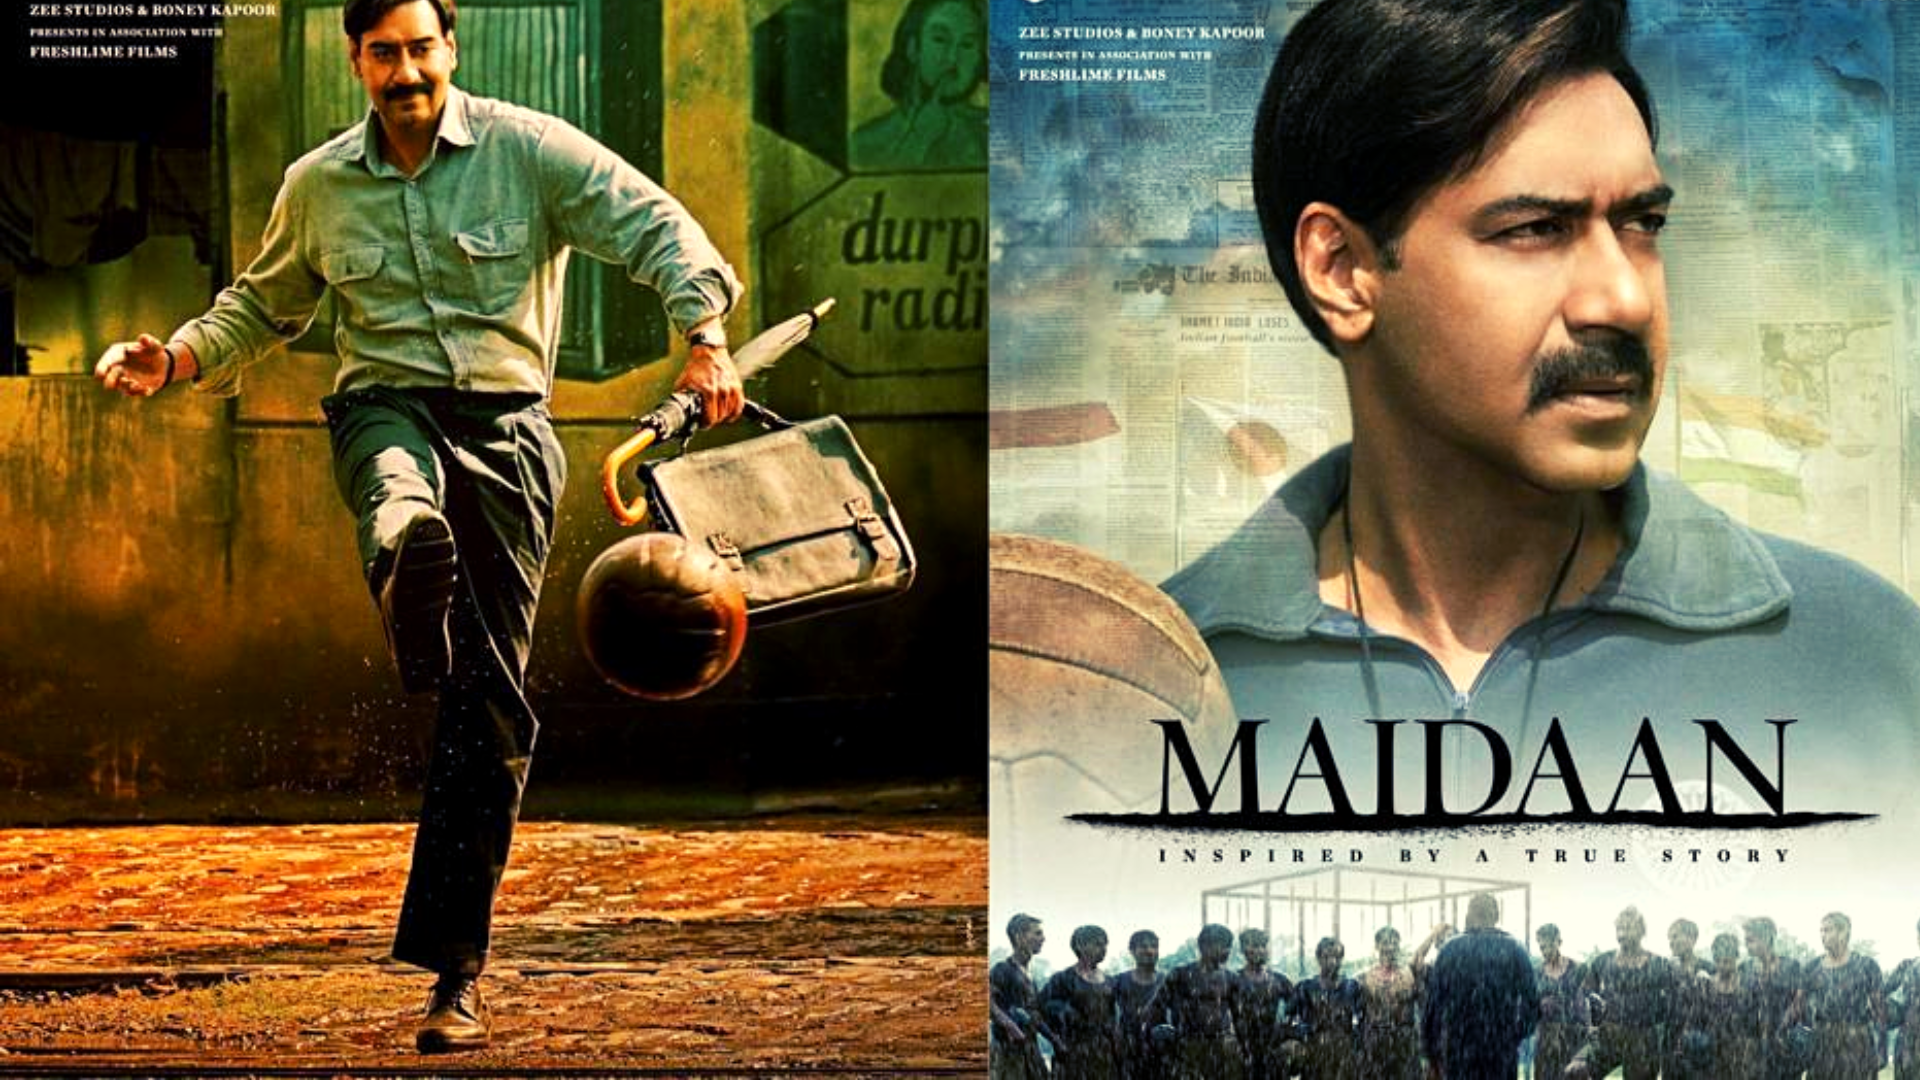 Maidaan Movie Ticket Offers: Release Date, Cast, Trailer & More